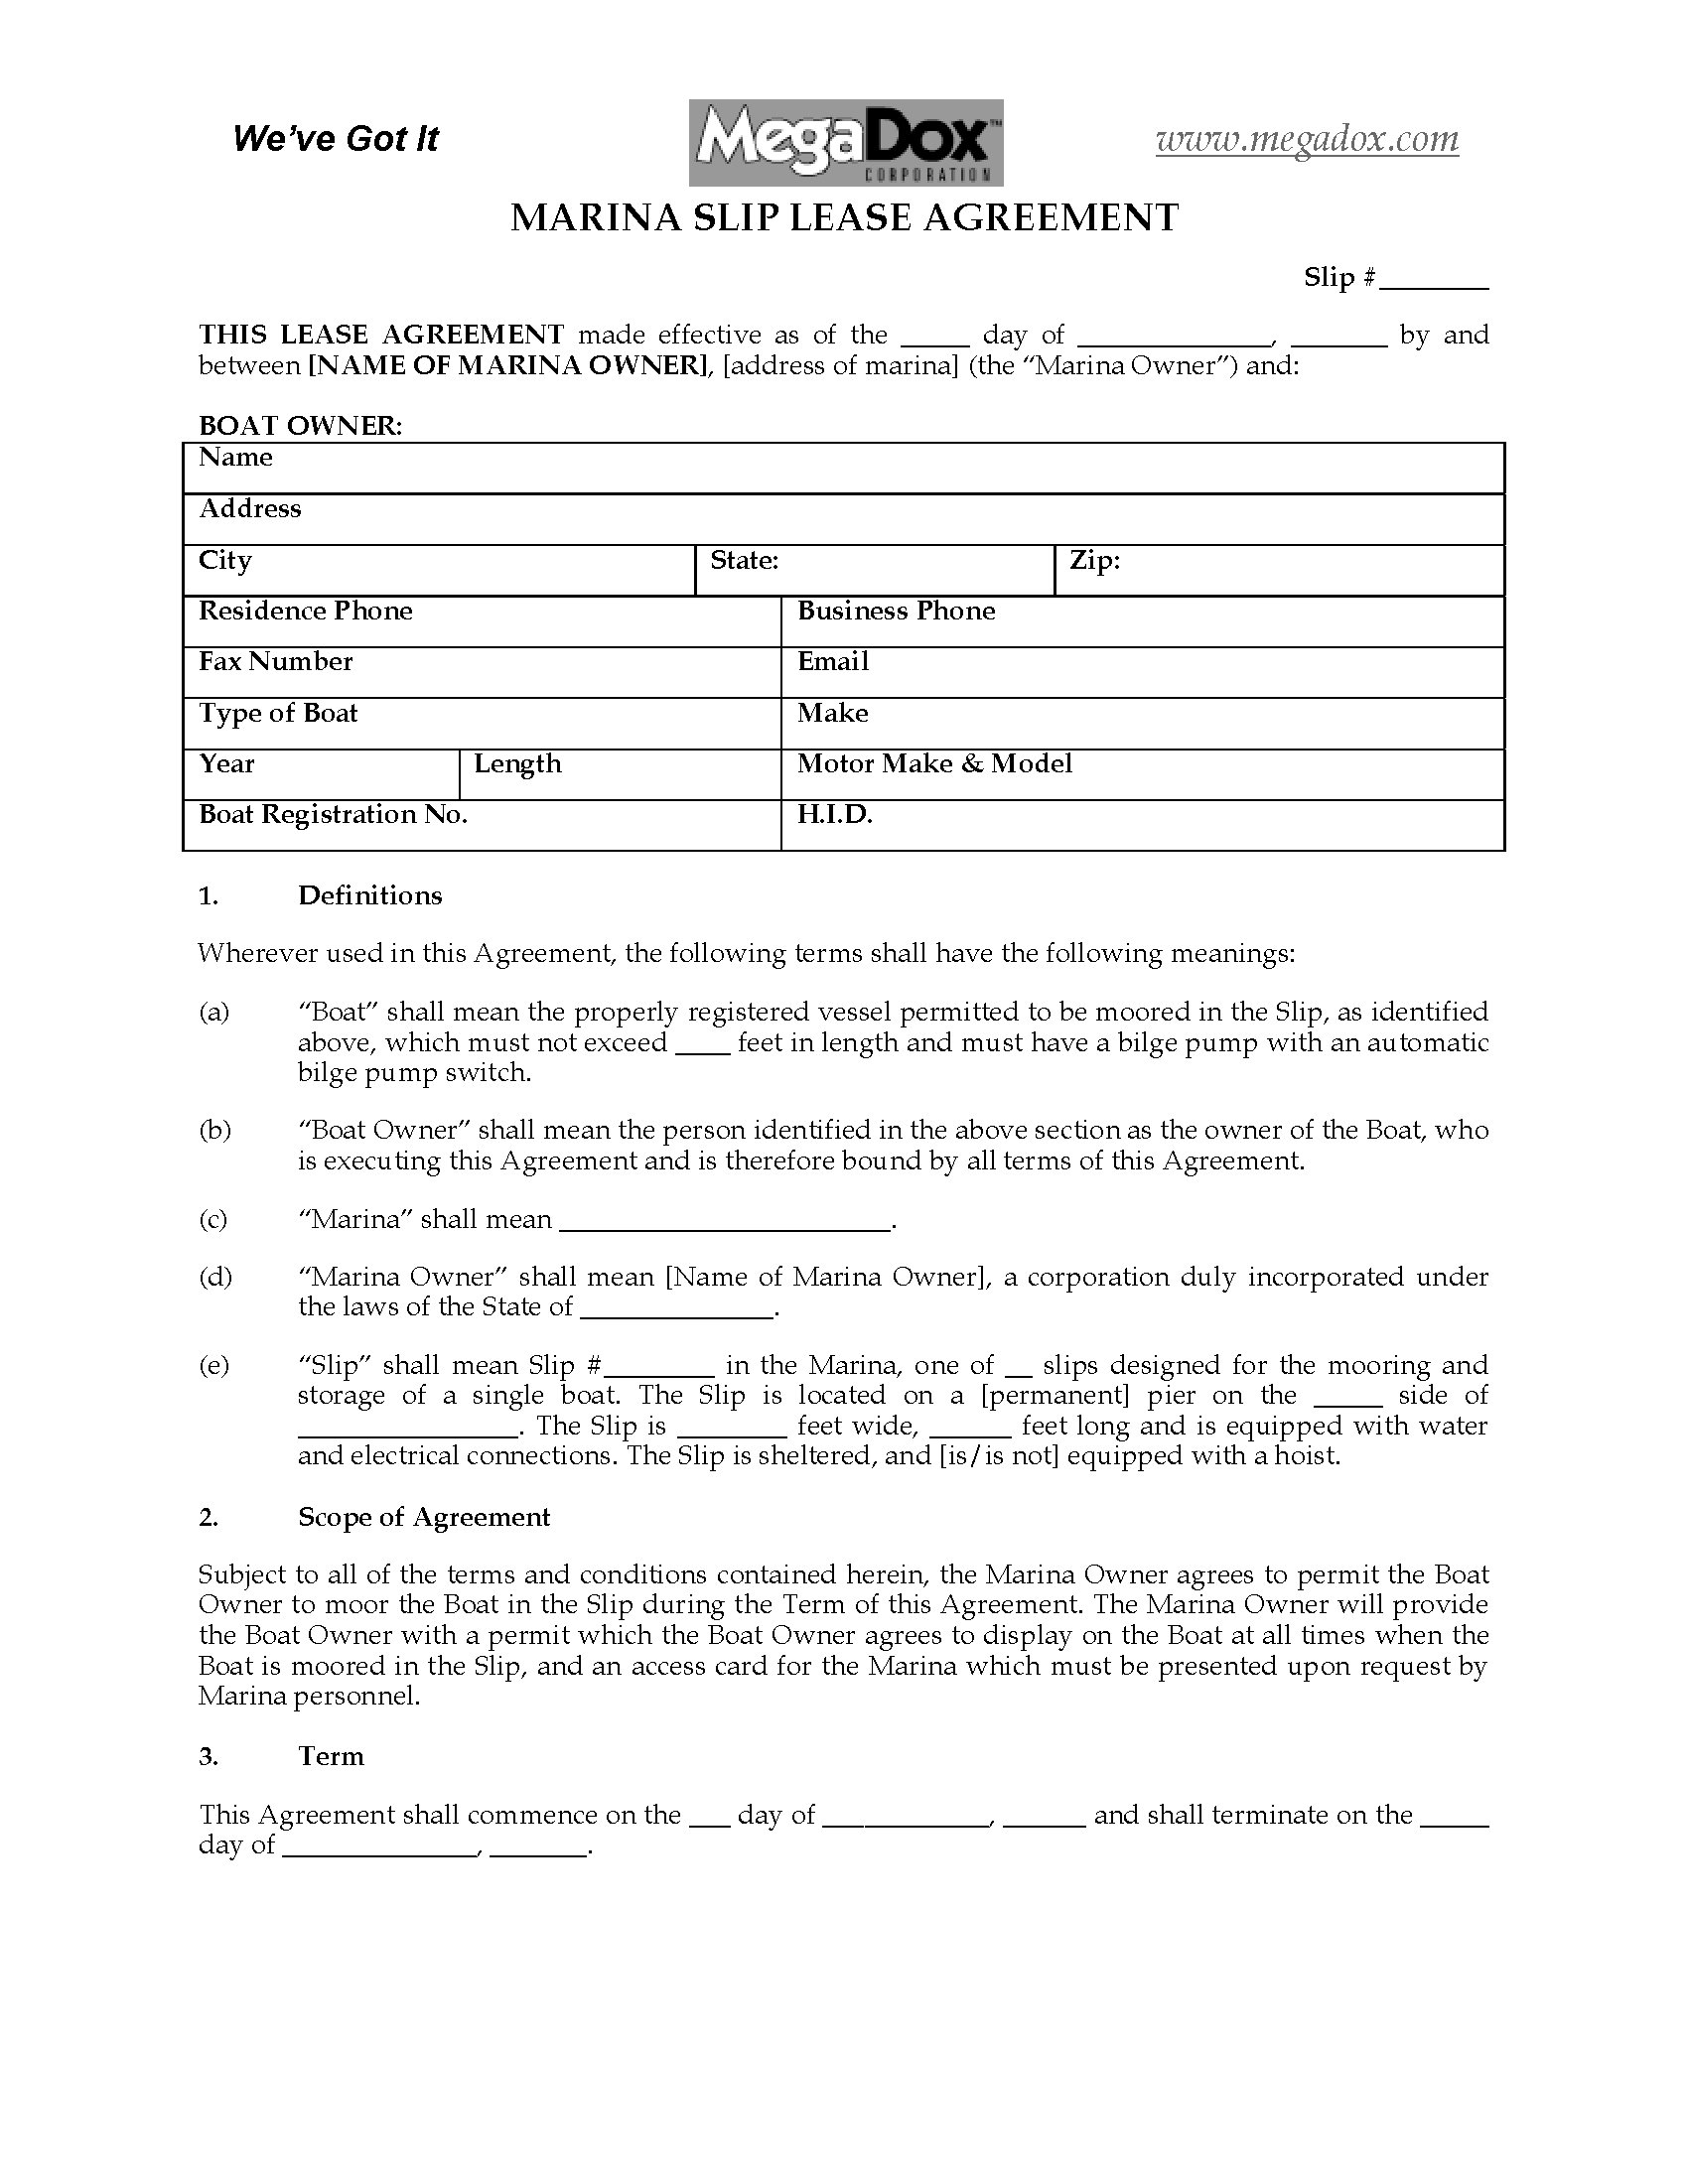 USA Marina Slip Rental Agreement  Legal Forms and Business Within boat slip rental agreement template